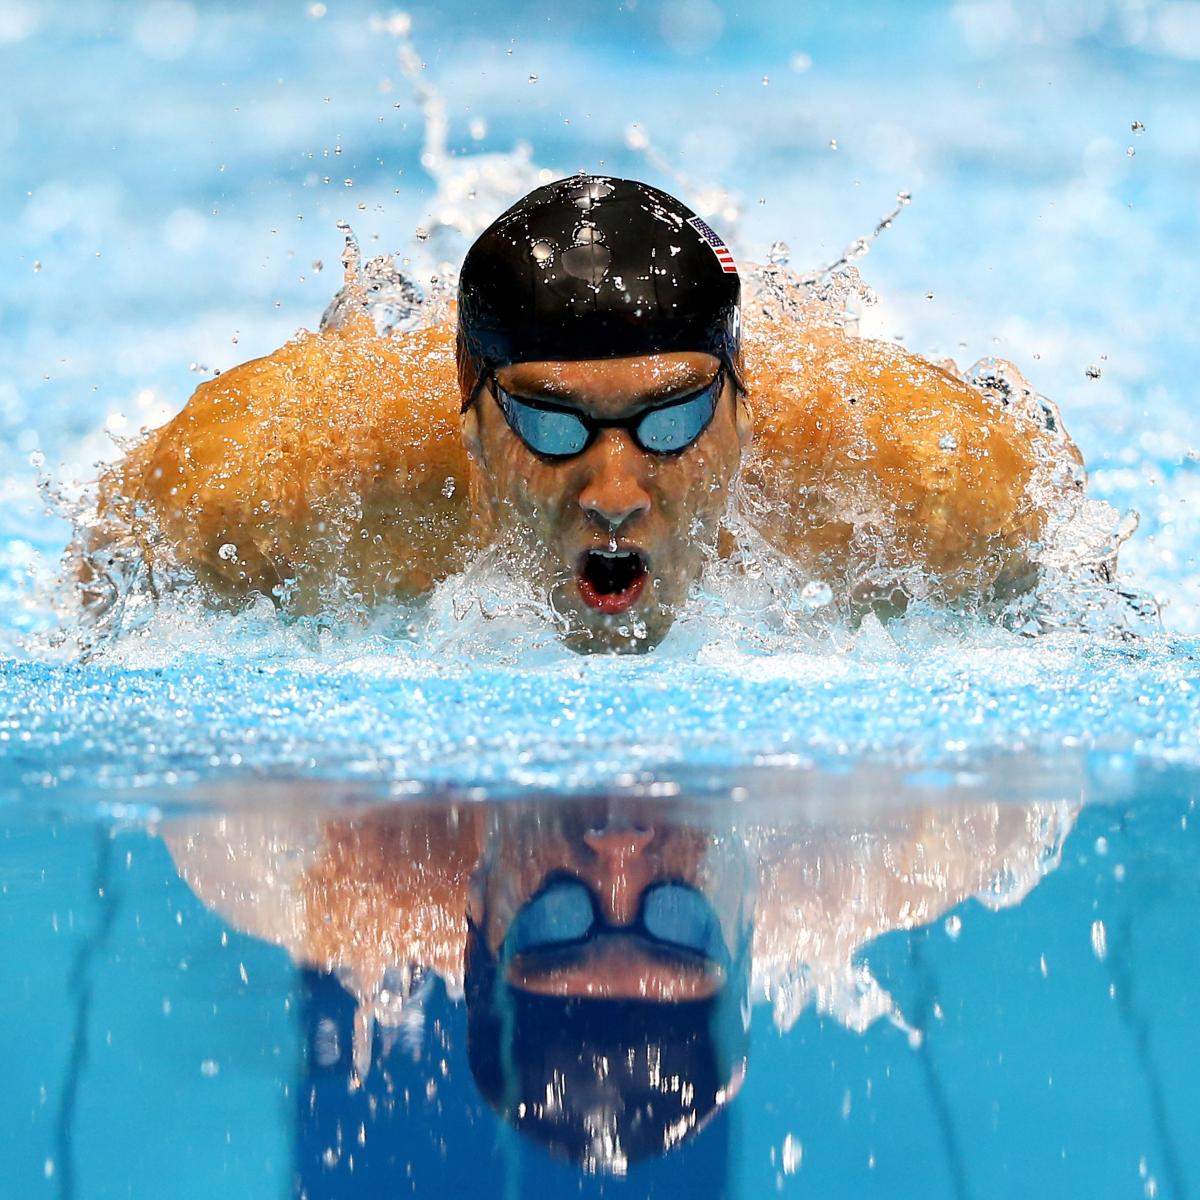 Olympic Swimming Results 2012: Day 1 Recap, Top Times & Medal Standings